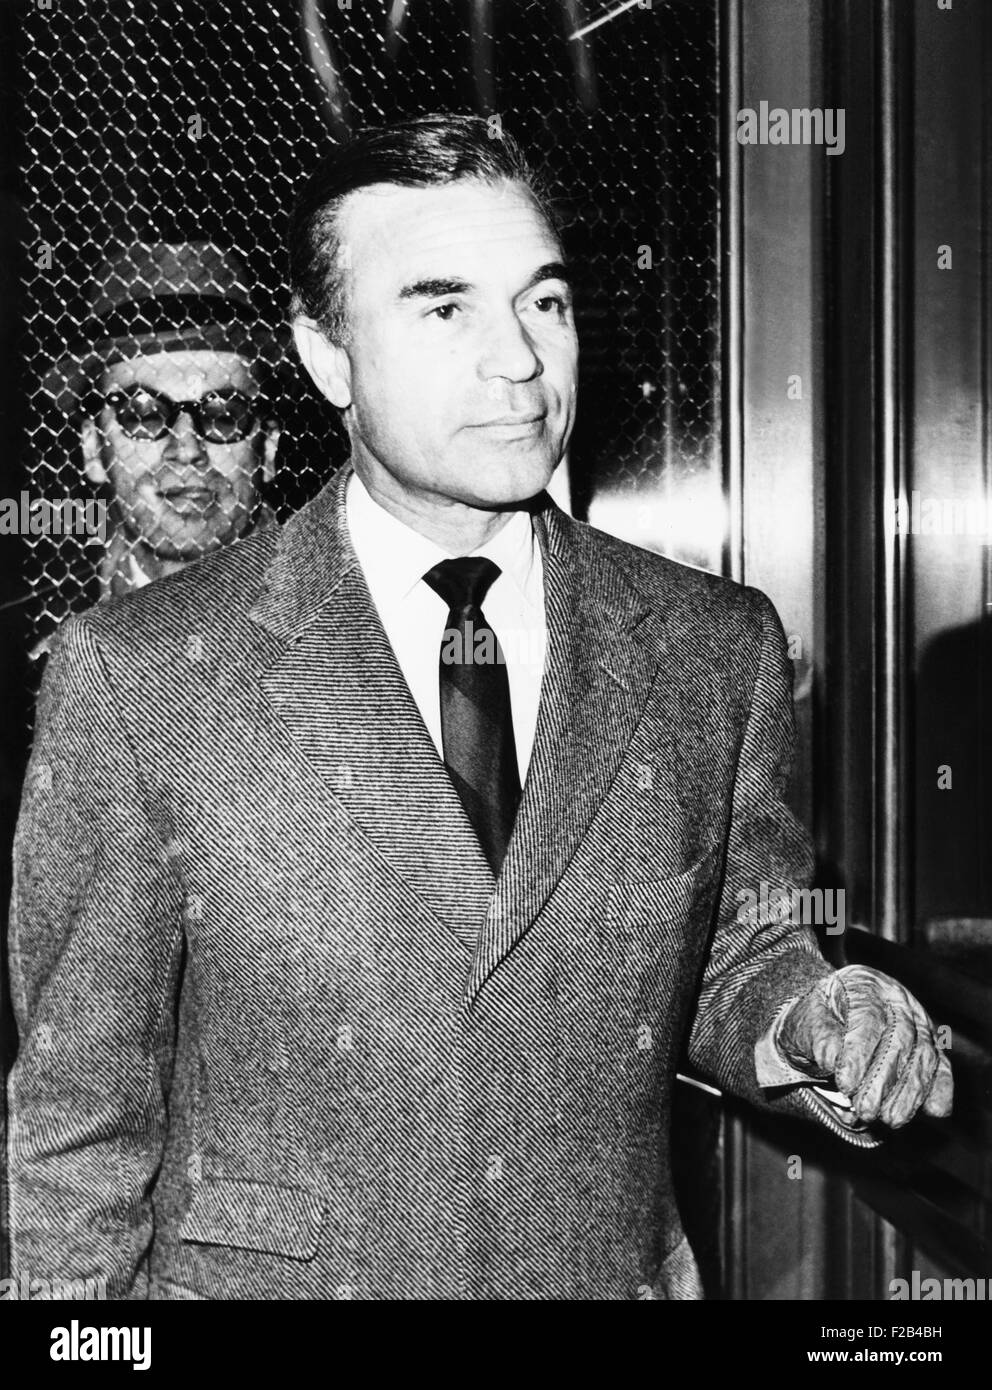 Ex-diplomat Porfirio Rubirosa, arriving at the NYC District Attorney's office for questioning. When the Trujillo dictatorship ended, he lost his position as Dominican Republic inspector of embassies on Jan. 2, 1962. Without diplomatic immunity he was questioned concerning the 1935 disappearance of Trujillo opponent Sergio Bencosme. Rubirosa was never charged. - (CSU 2015 5 114) Stock Photo